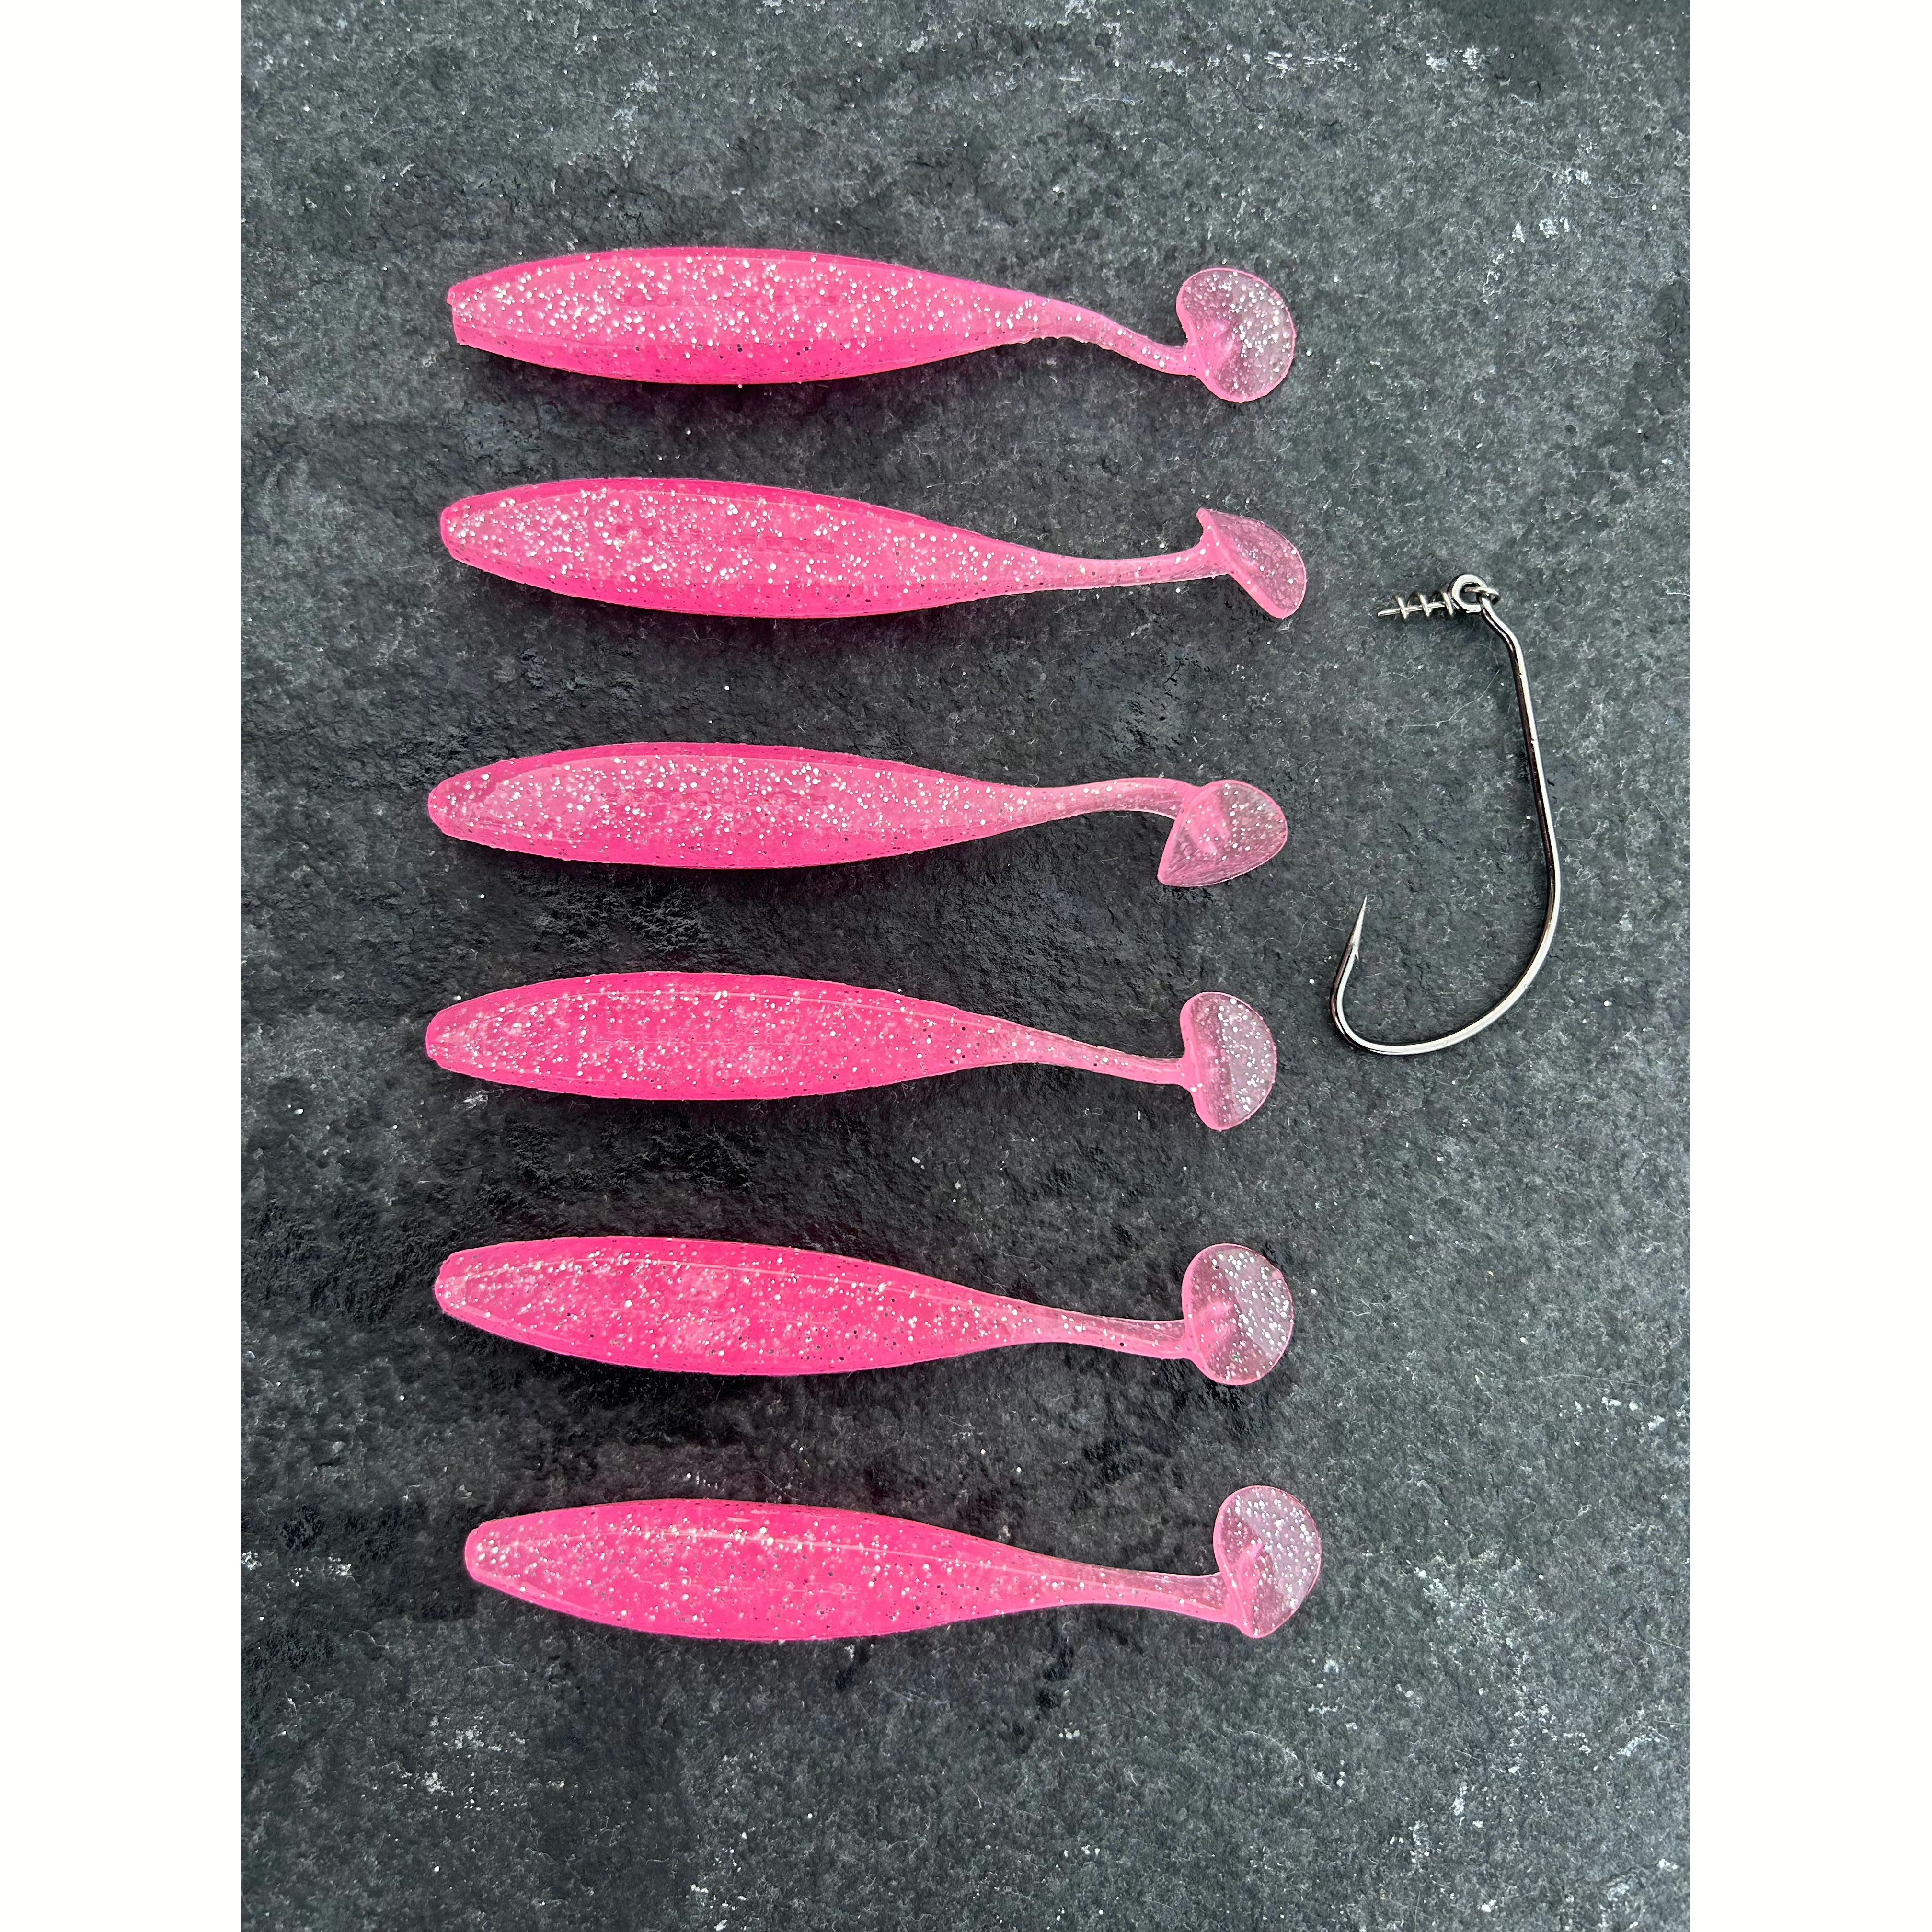 Small Weedless “Salted” LRF Shads 90mm 8g